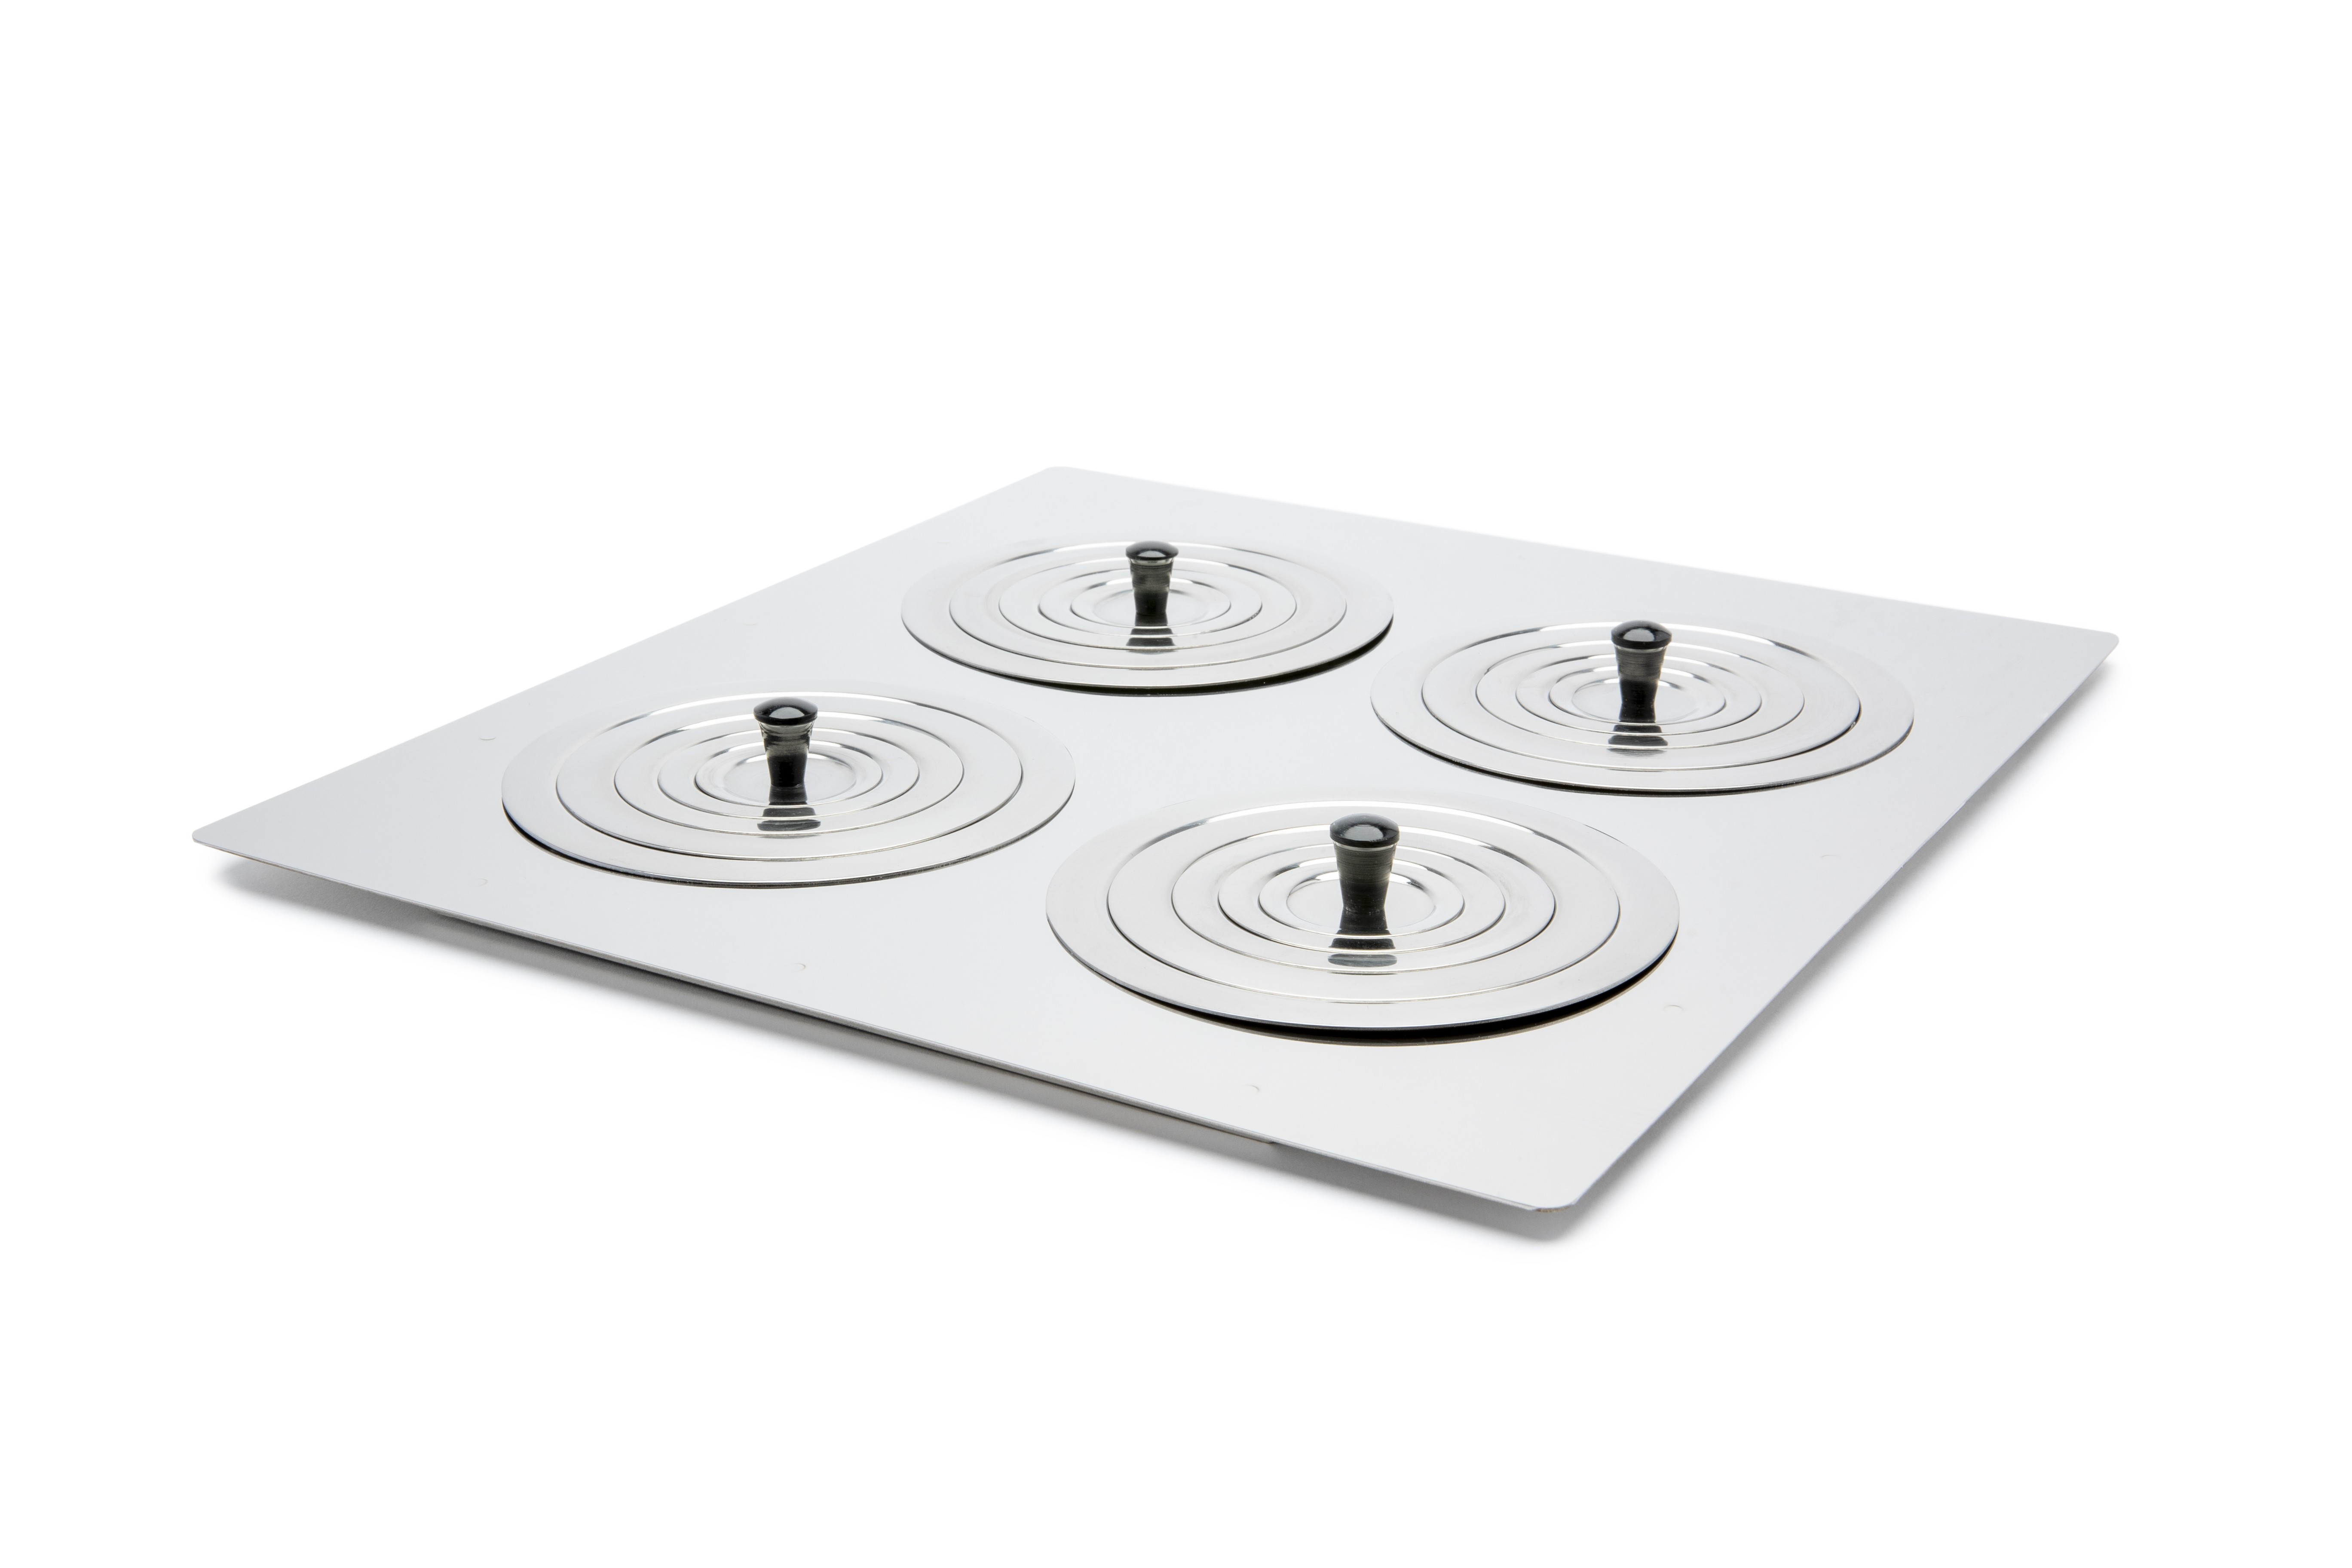 LF14 - Grant Instruments Stainless Steel Flat Lid With Ring Sets For Unstirred Water Baths